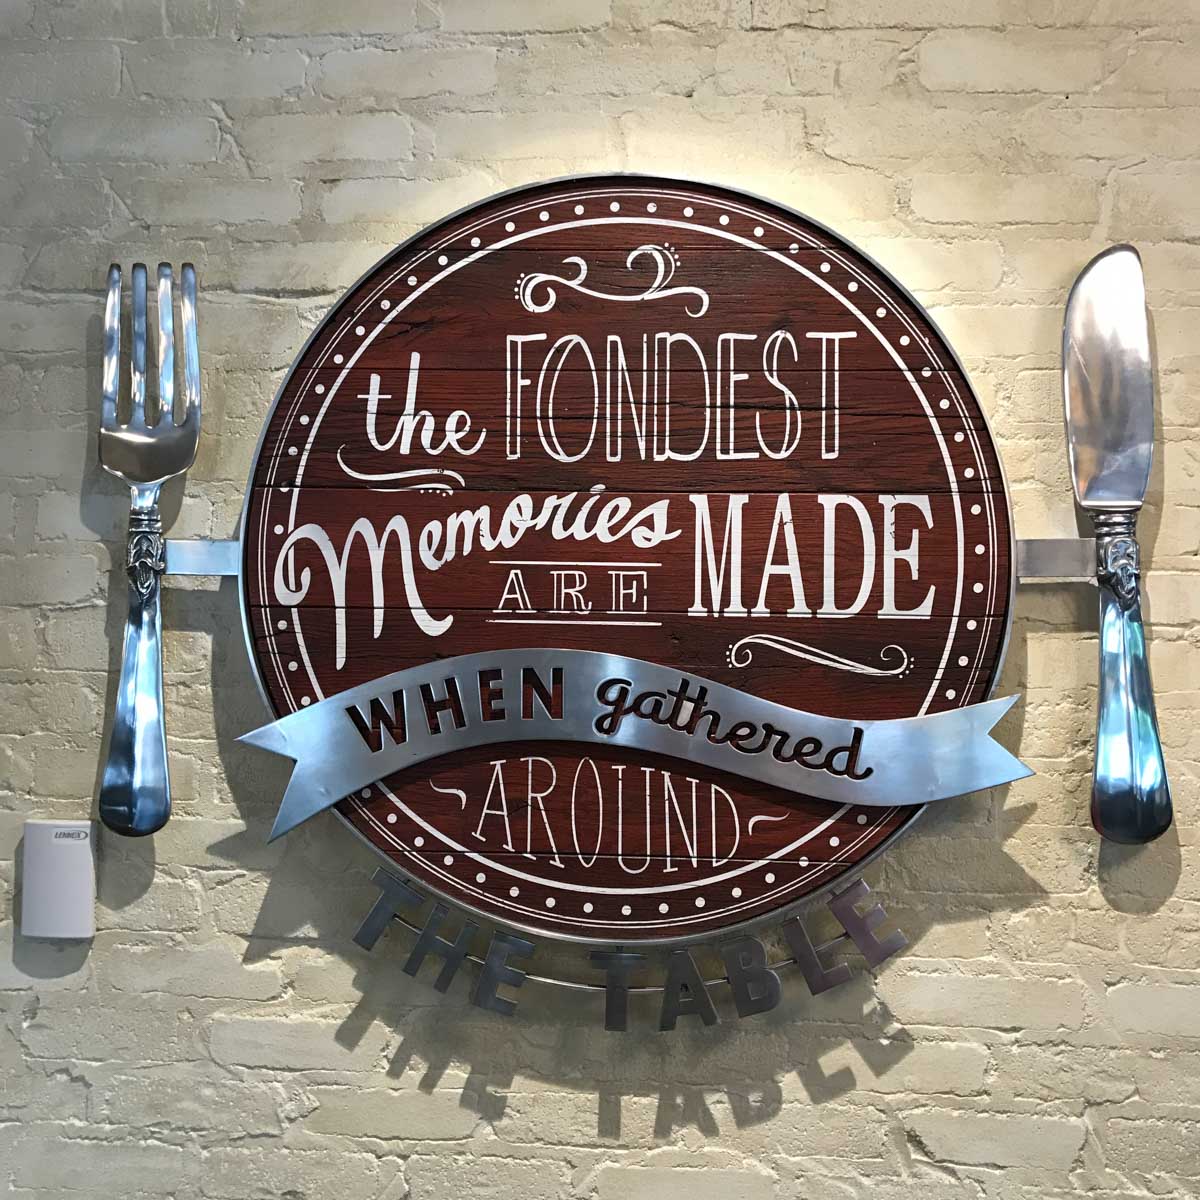 A sign on the wall at Metro Diner says "The fondest memories are made when granted around the table."